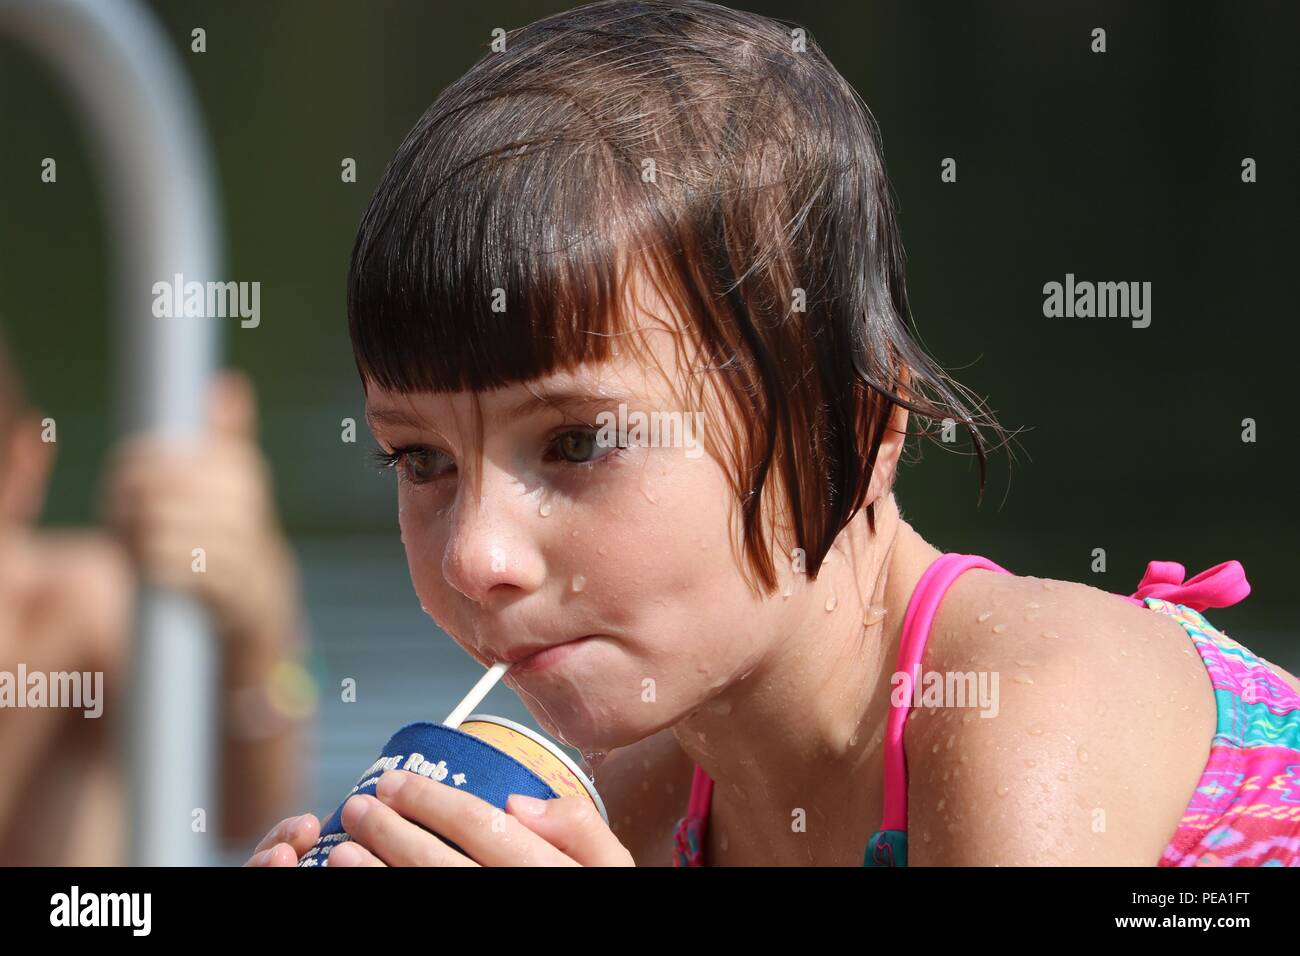 Wet young child having a drink while taking a break from swimming Stock Photo